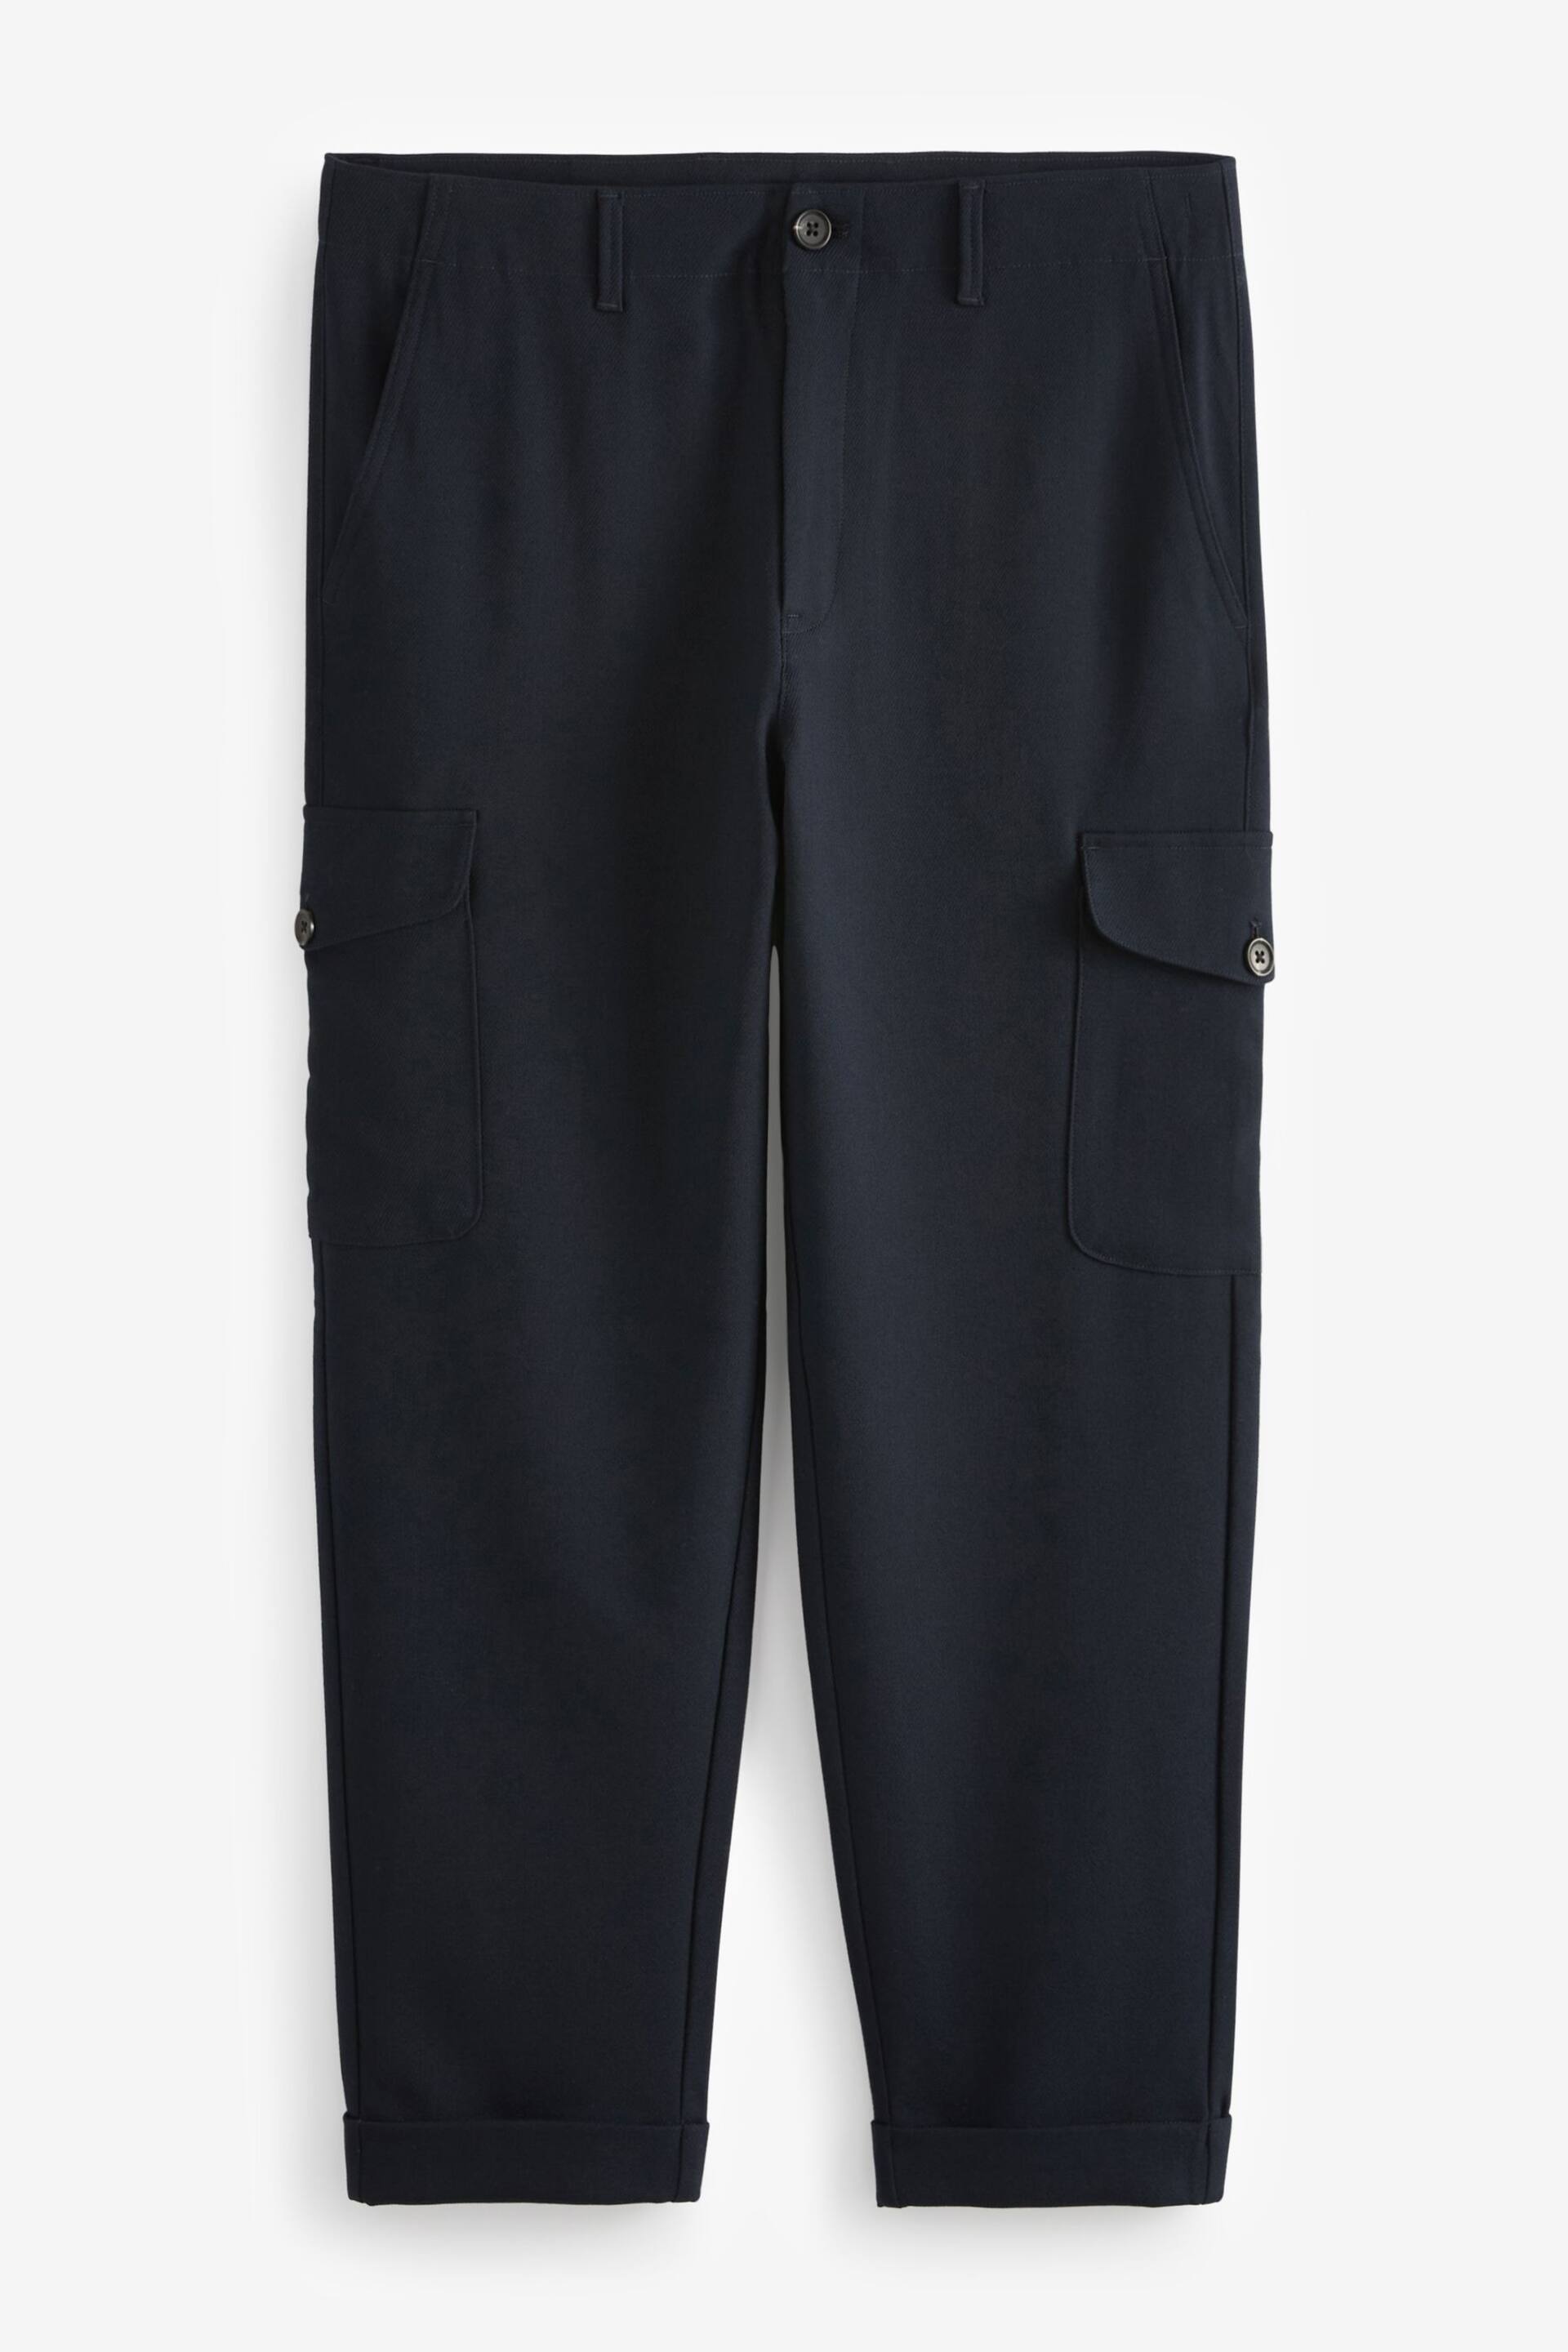 Navy Relaxed Tapered EDIT Twill Cargo Trousers - Image 6 of 9